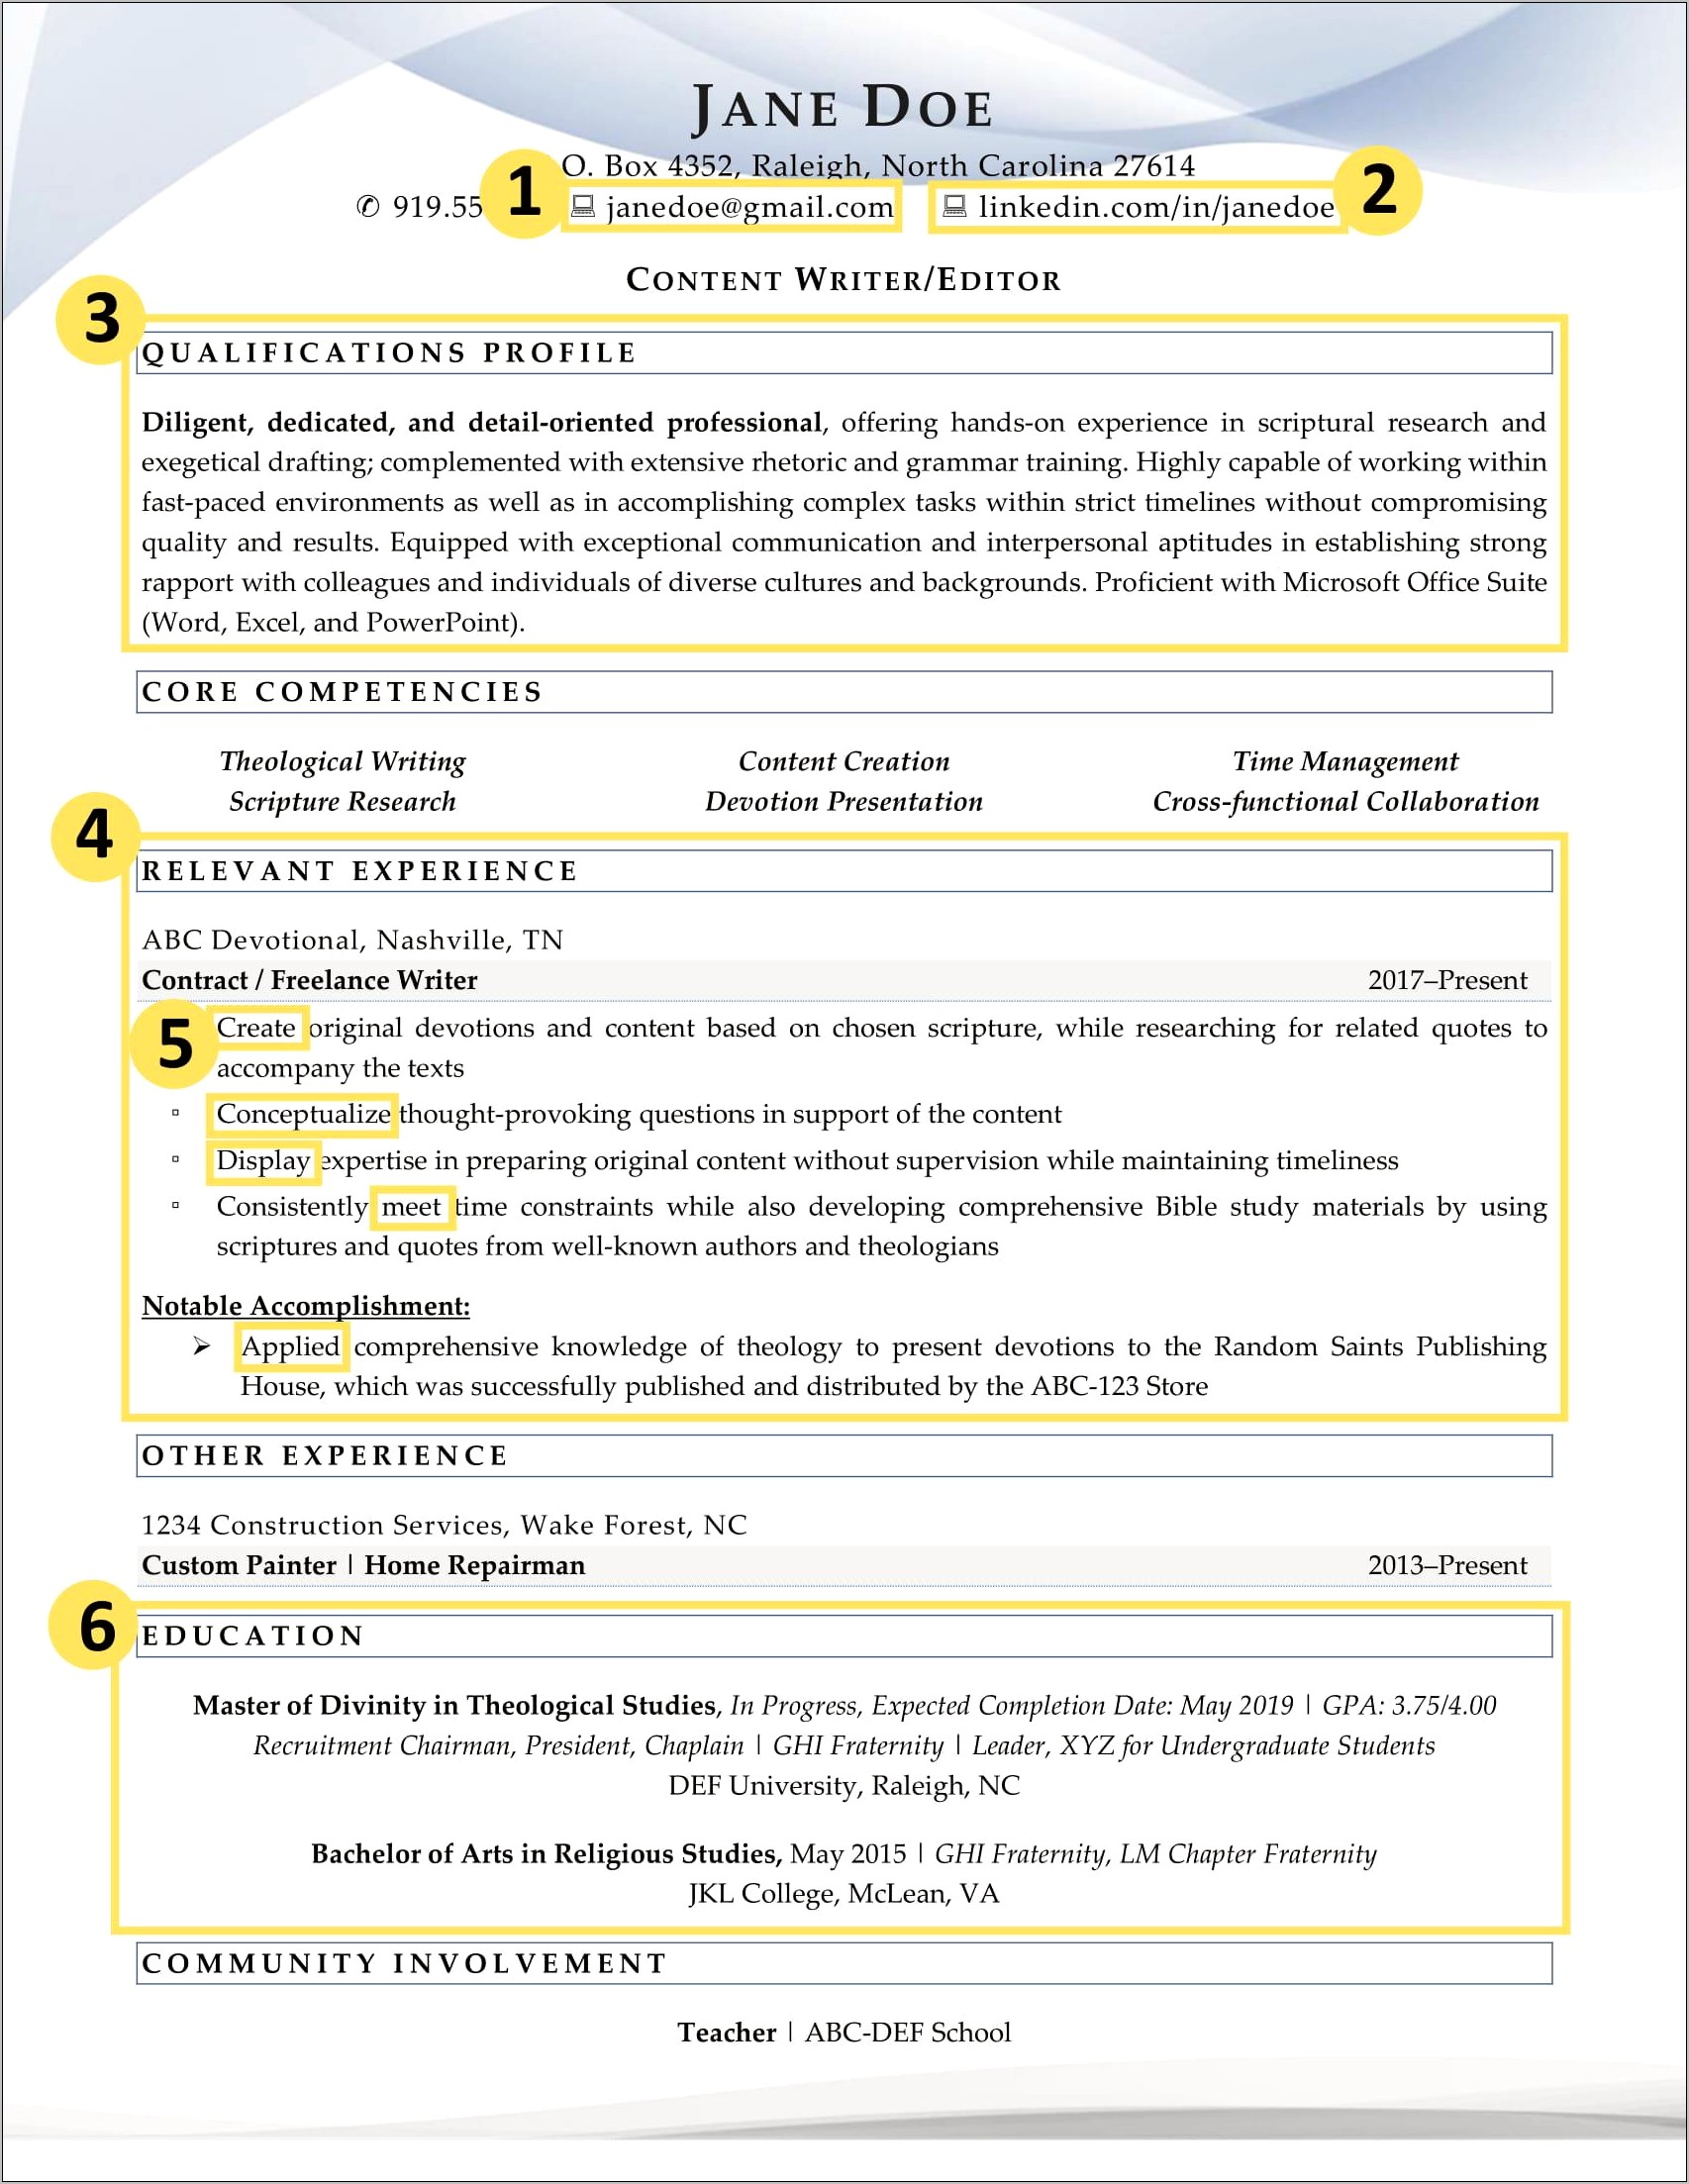 Resume For College Graduate Skills Section